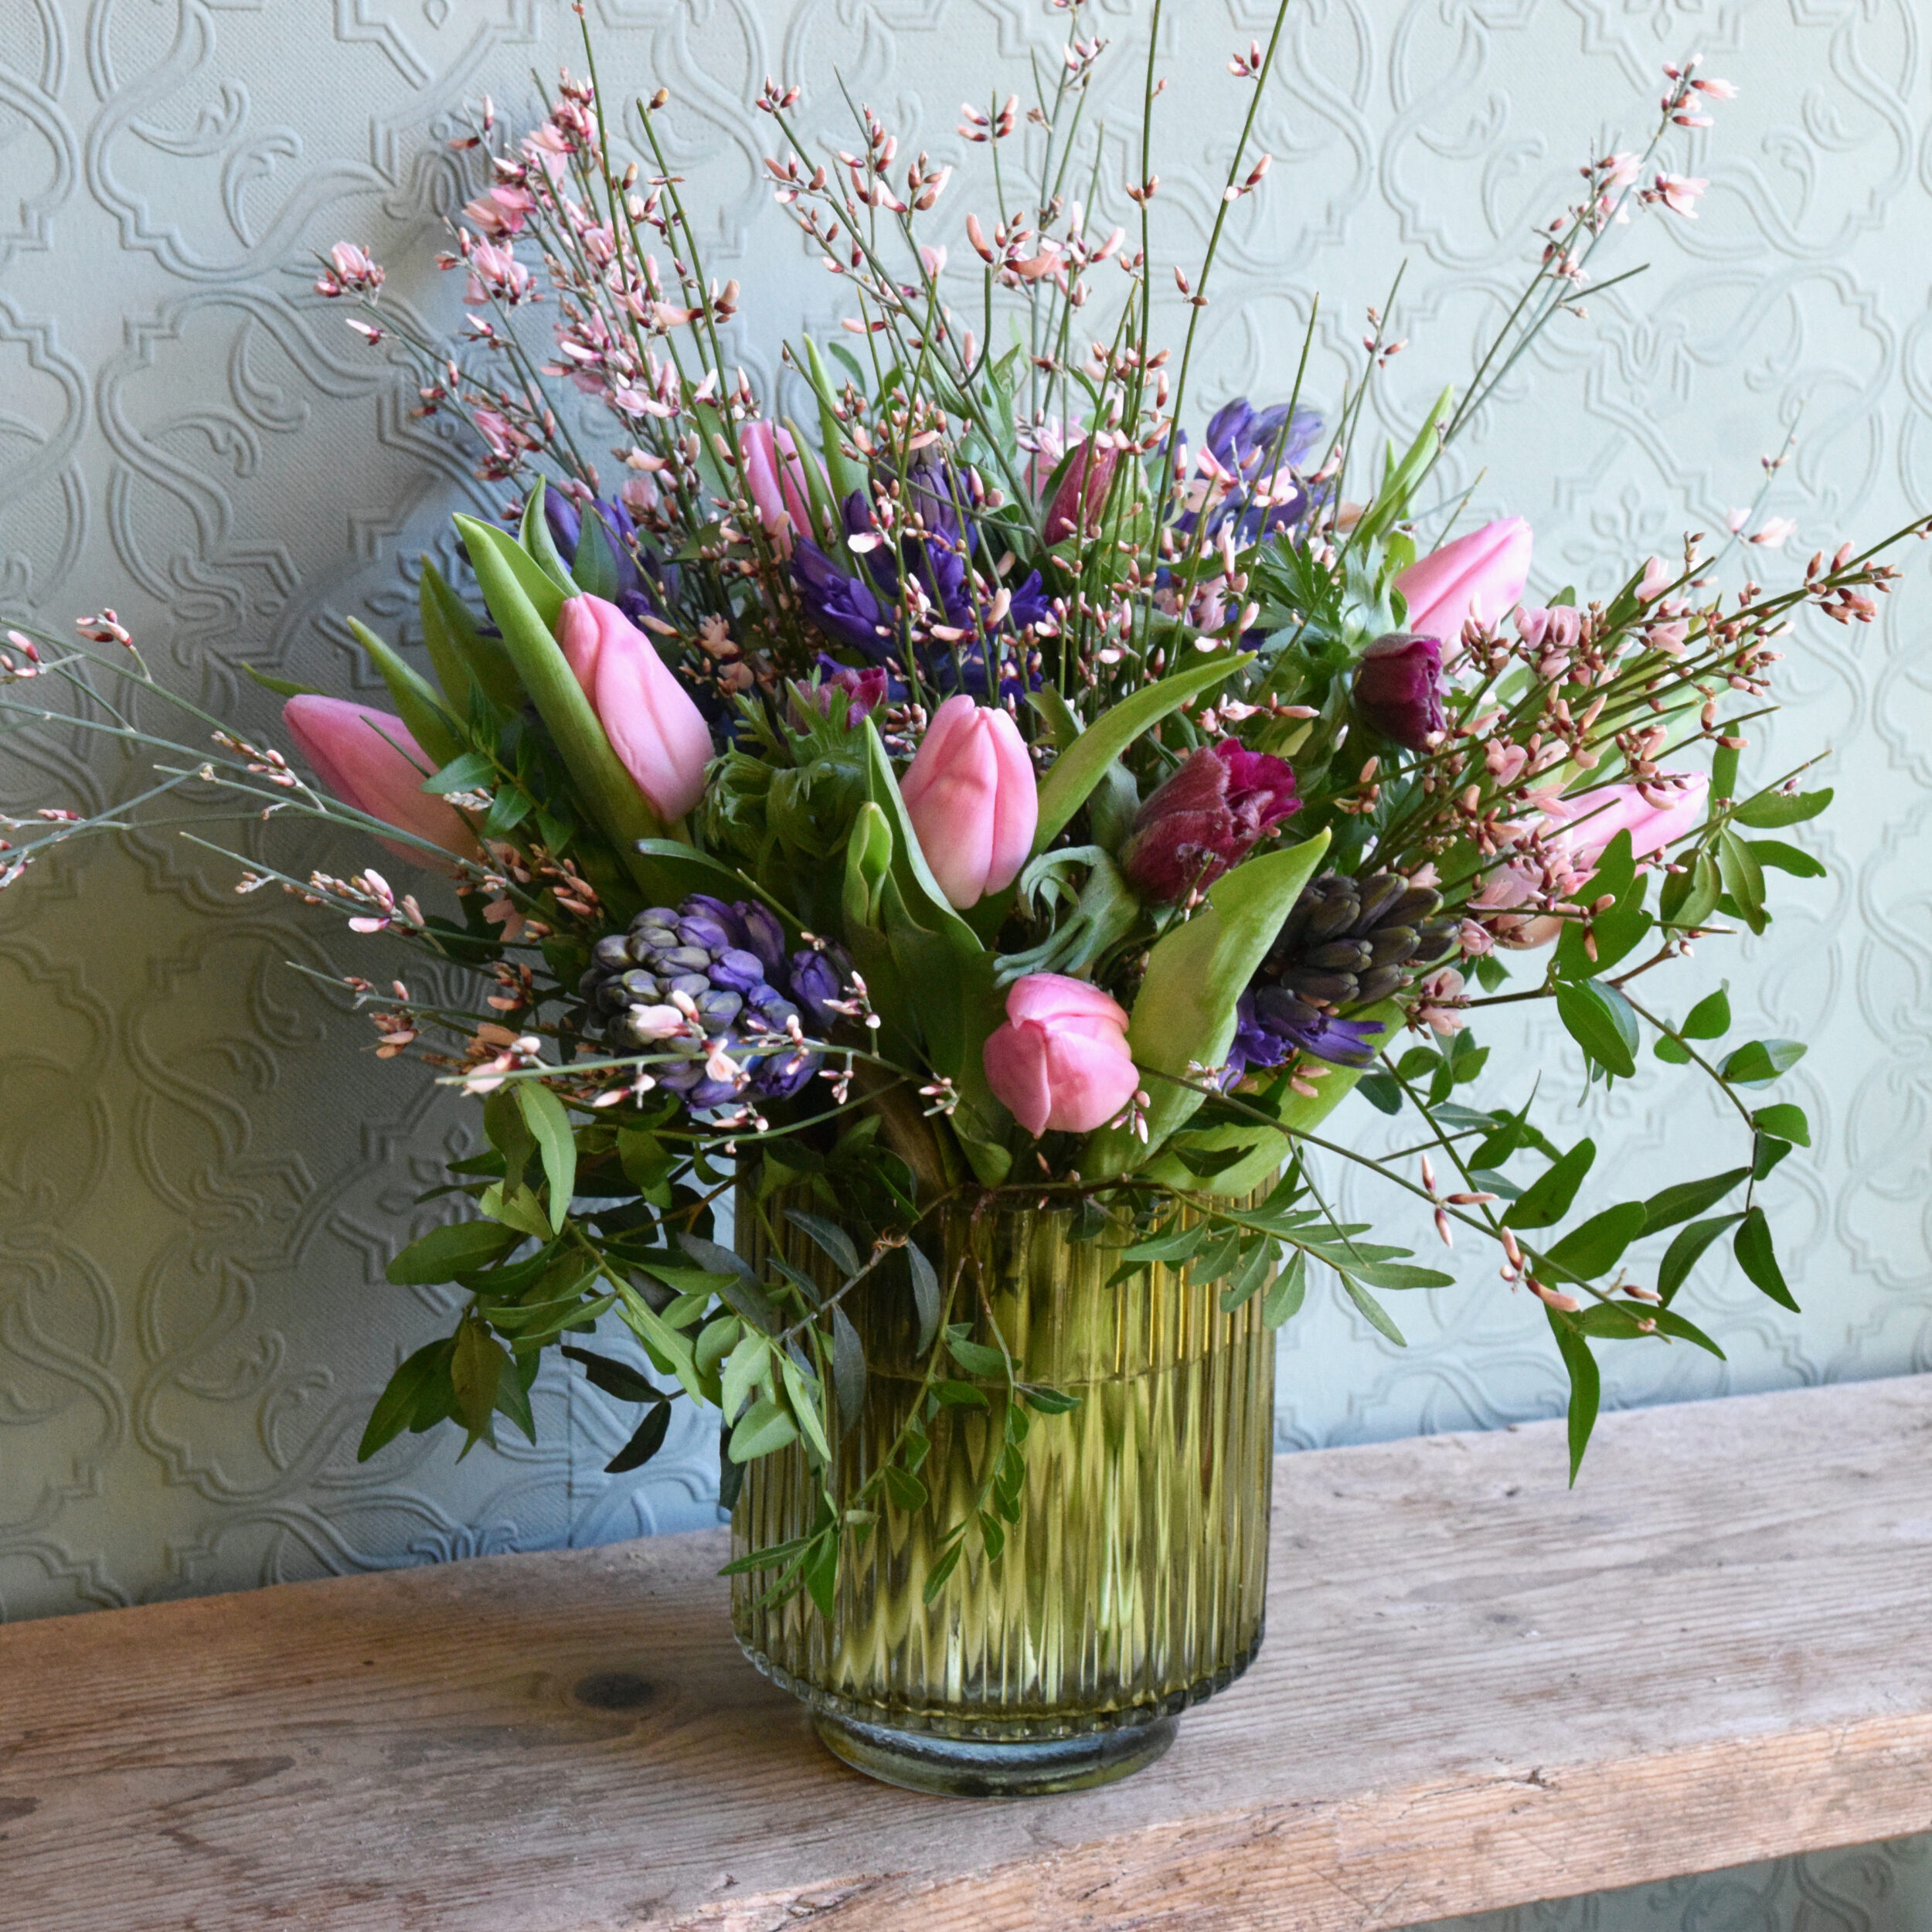 Photo showing a sample of a Spring flower vase arrangement in mixed colour available to order from Kensington flowers London